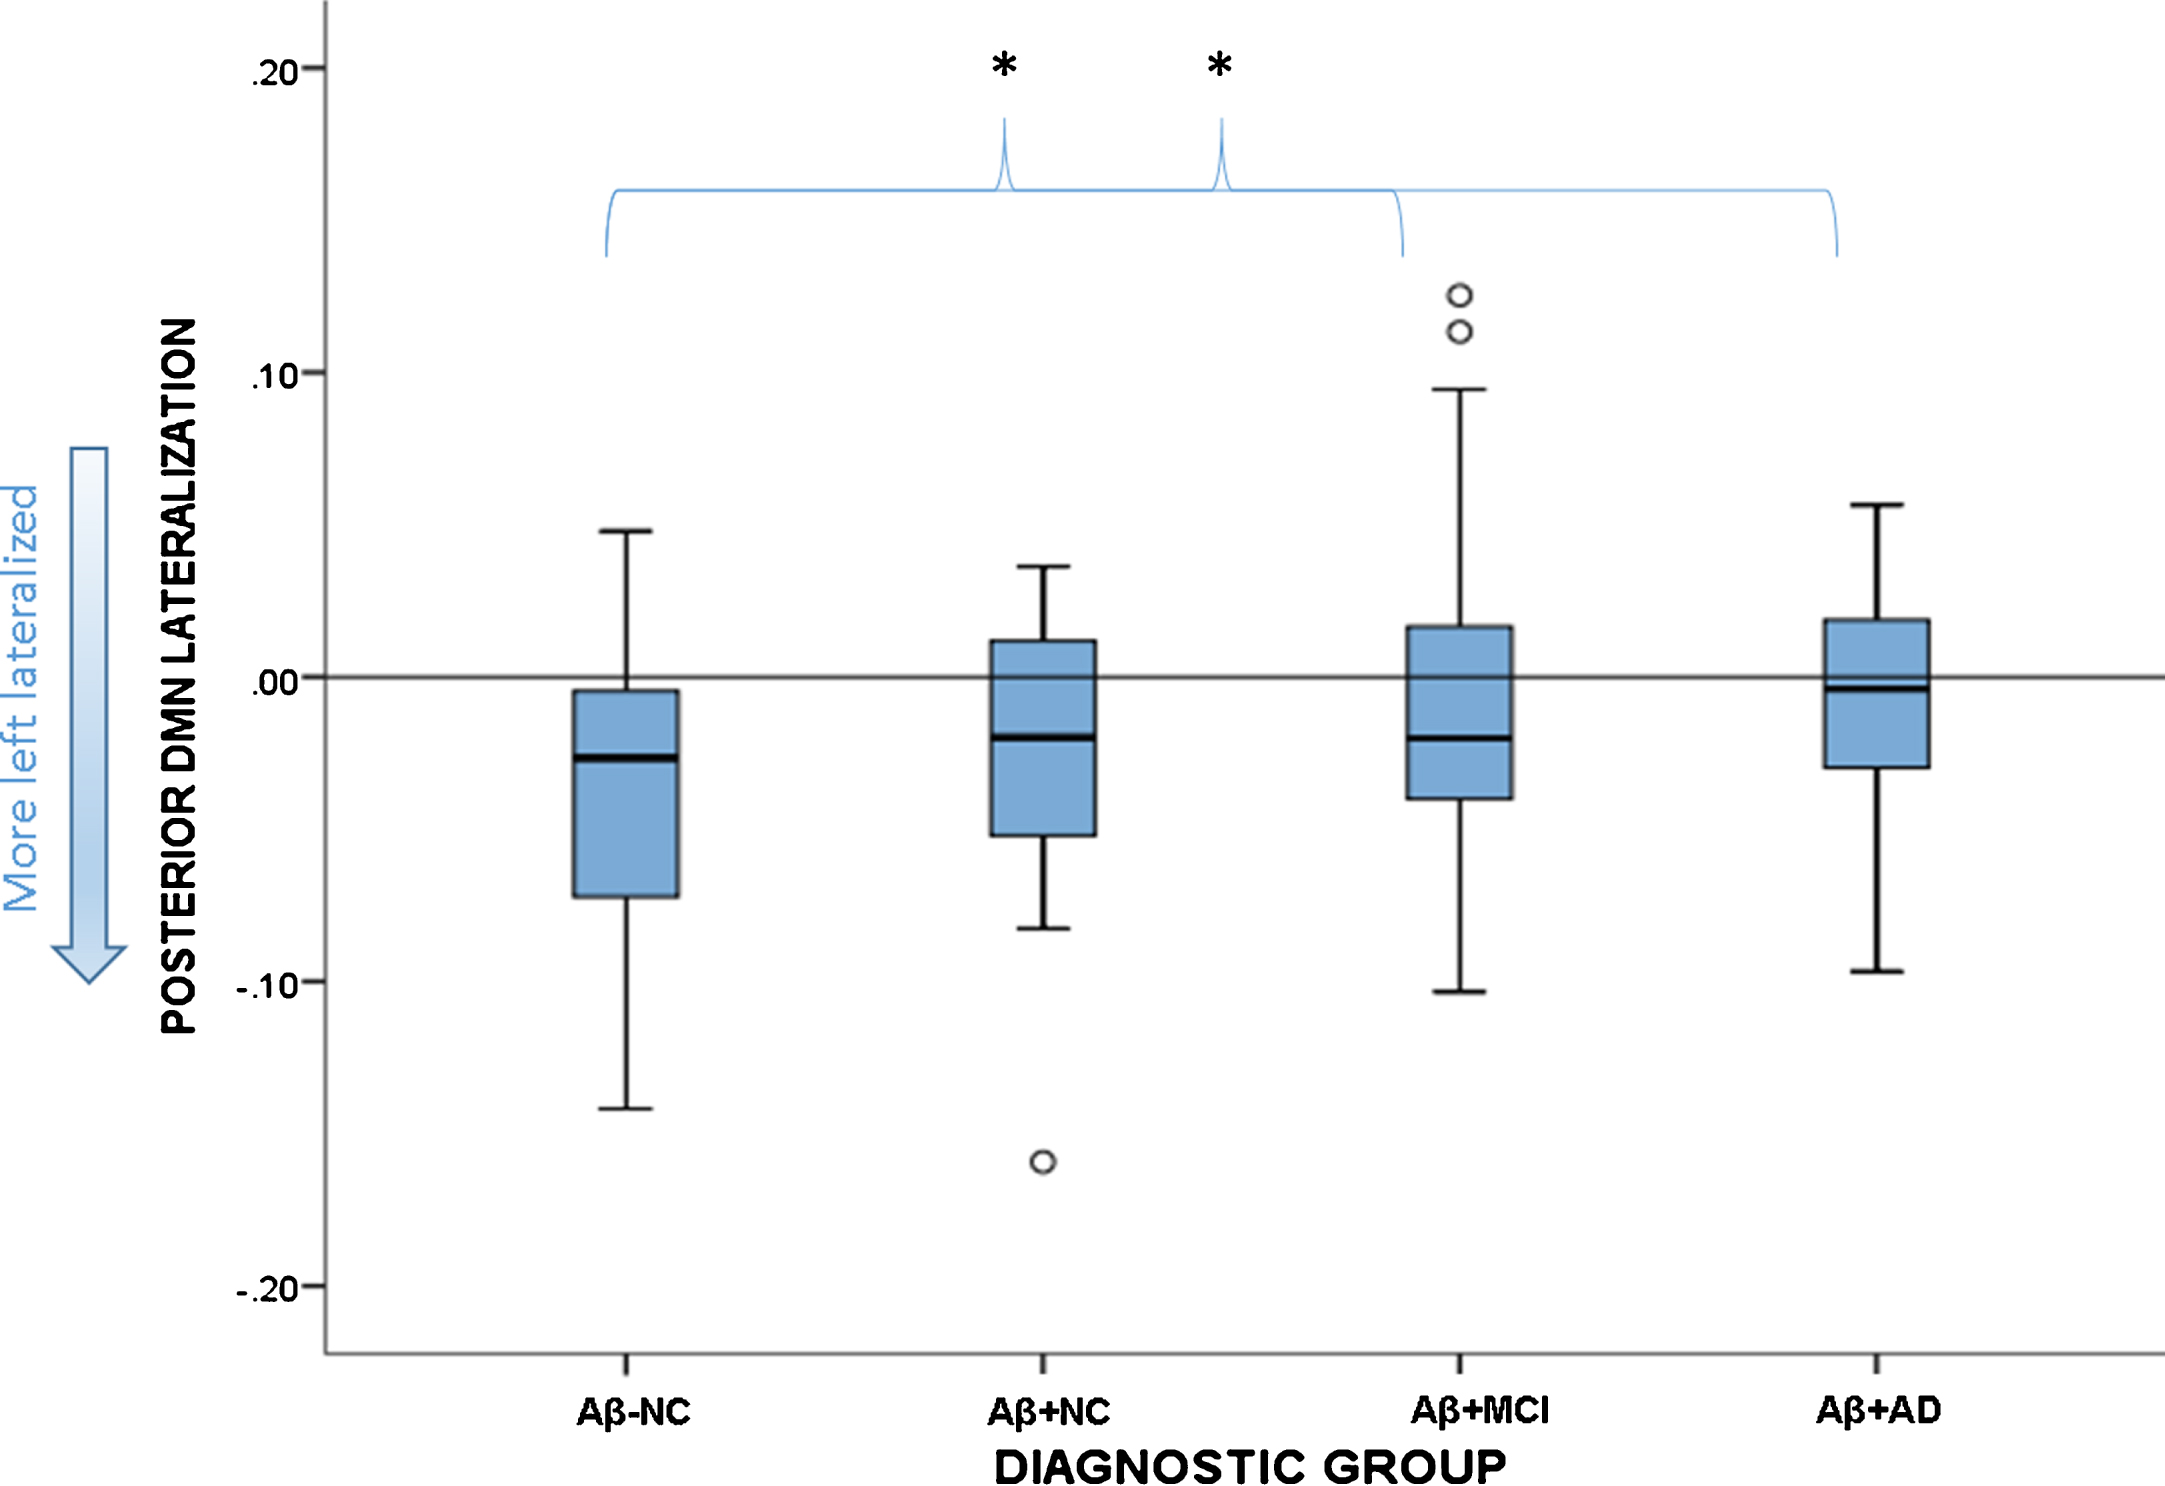 Boxplot showing spread of functional lateralization scores for the pDMN in each diagnostic group. The reference line at zero signifies no lateralization, anything below this is left lateralized. The Aβ-NC group differed significantly from the Aβ+MCI and Aβ+AD groups, but not the Aβ+NC group. *signifies statistically significant group differences.